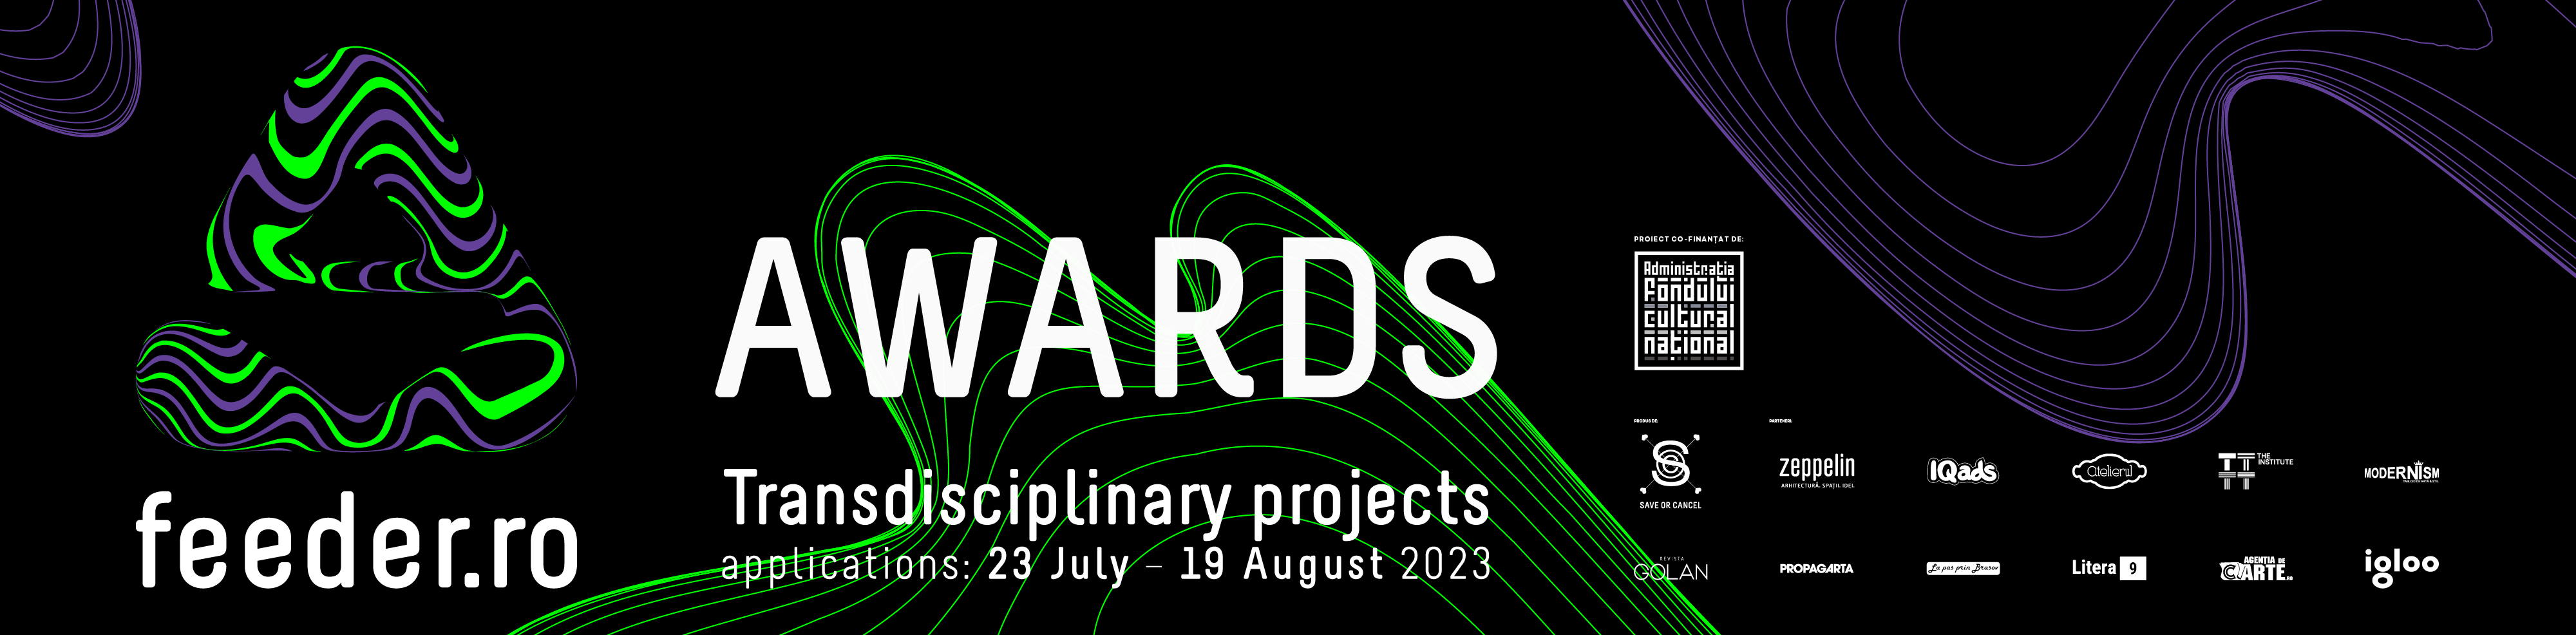 feeder.ro awards - open call for transdisciplinary projects